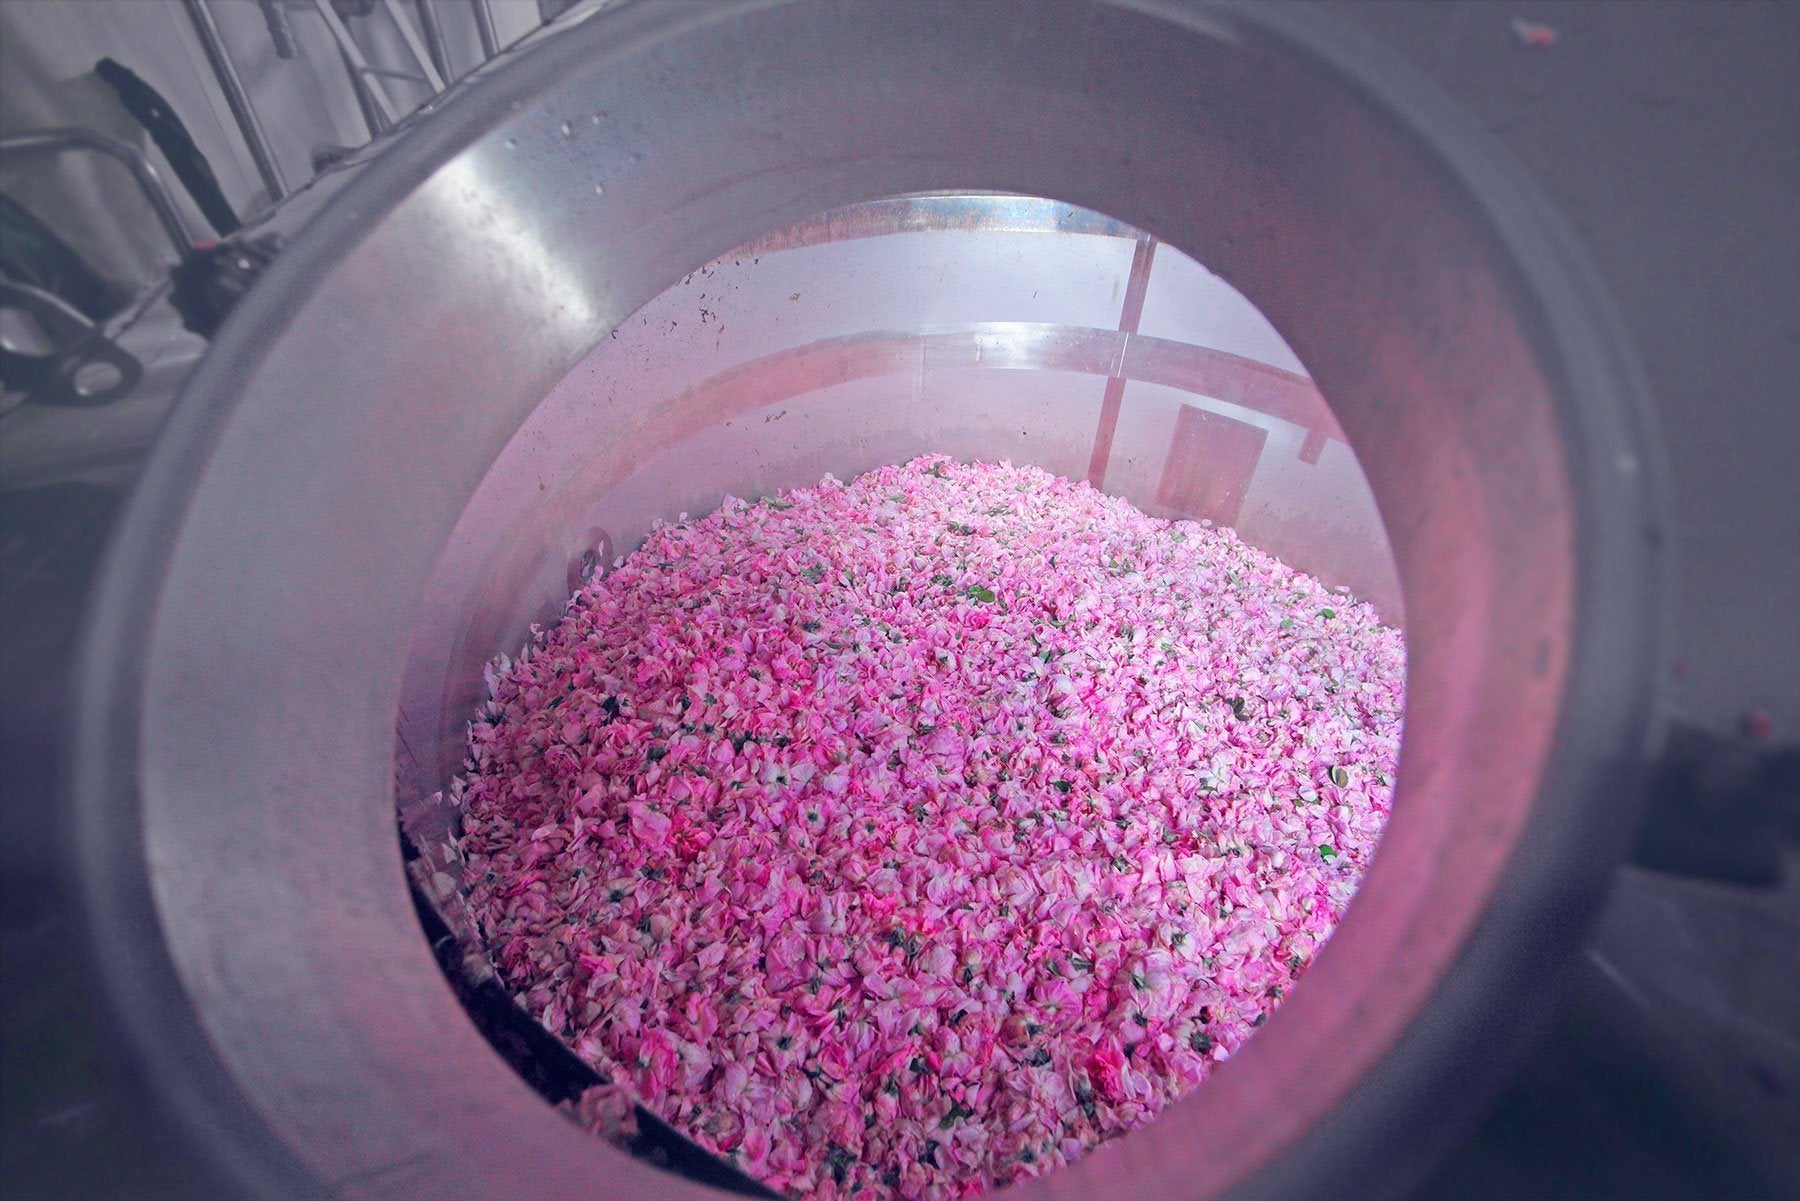 A large metal container filled with pink flowers.